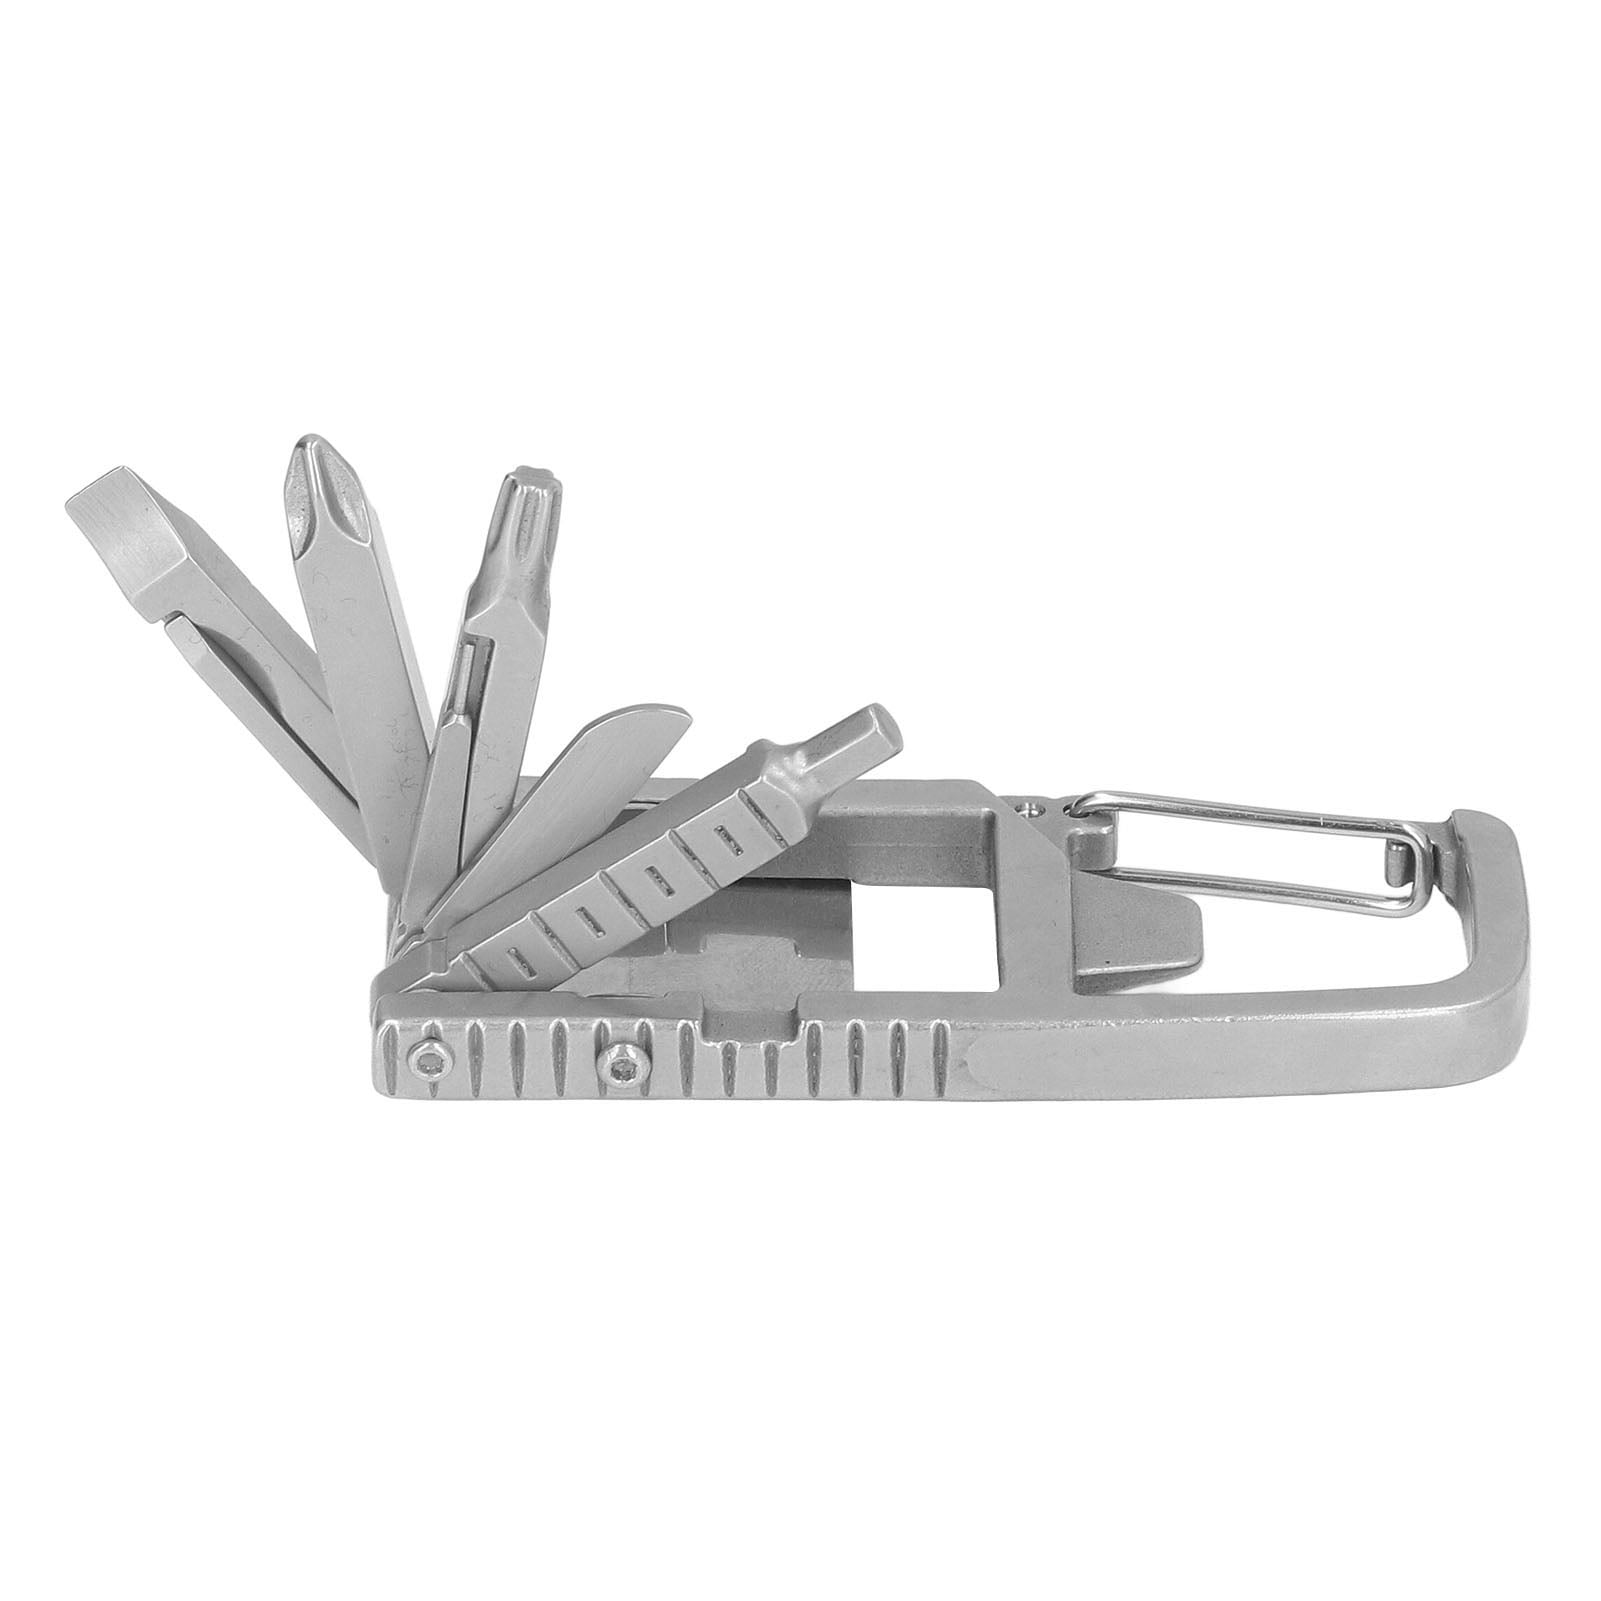 Multitool Key Chain AOBitter 18-in-1 Multitool Stainless Steel Bicycle Multifunction Tool 